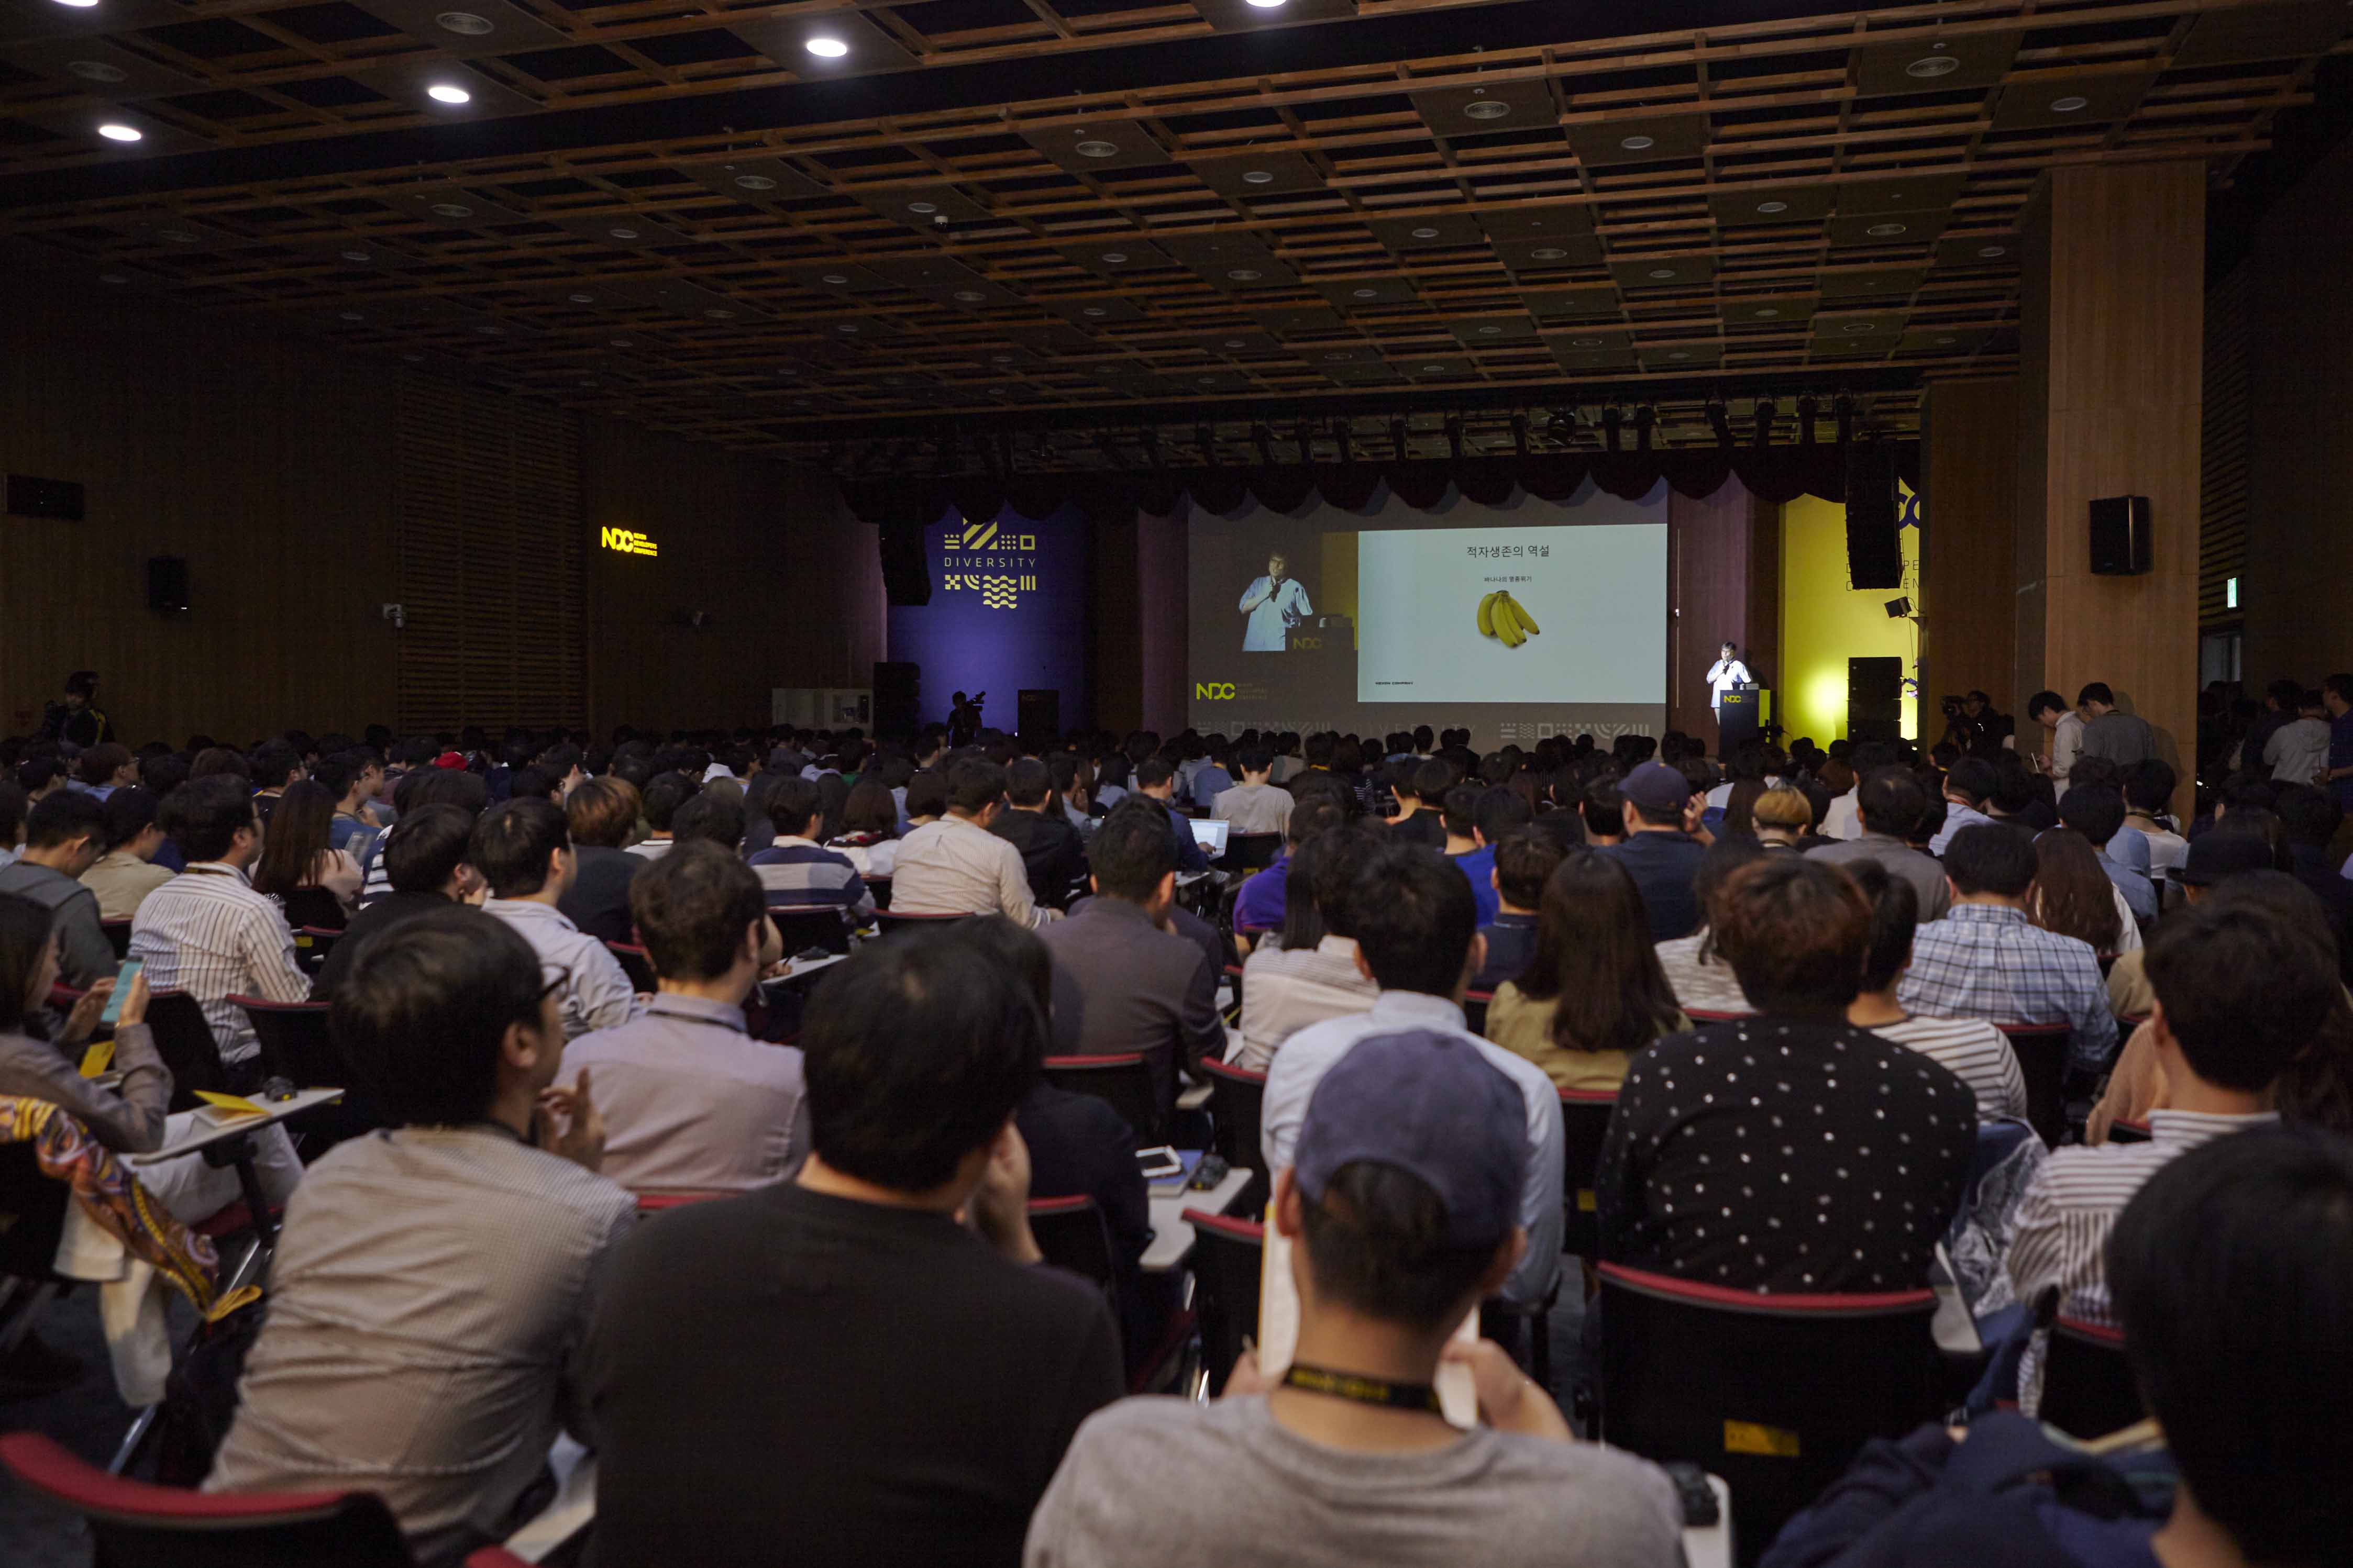 Nexon Group Announces Details of ‘Nexon Developers Conference 17', One of the Largest Conferences for Game Developers in Korea